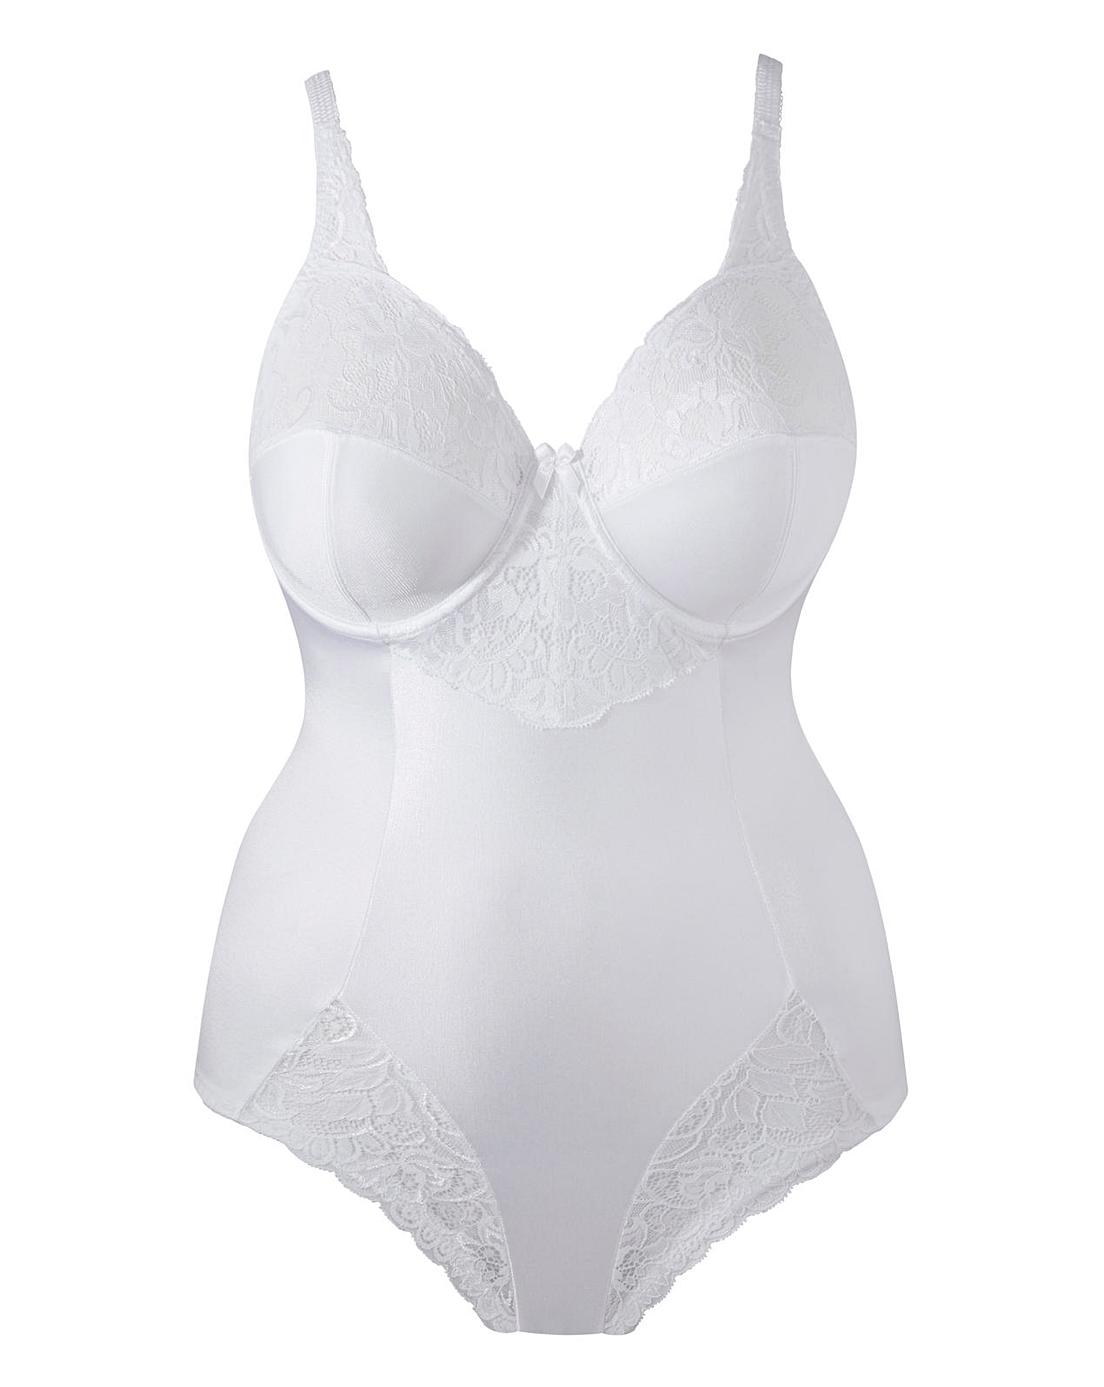 Charnos Superfit White Bodyshaper | Oxendales